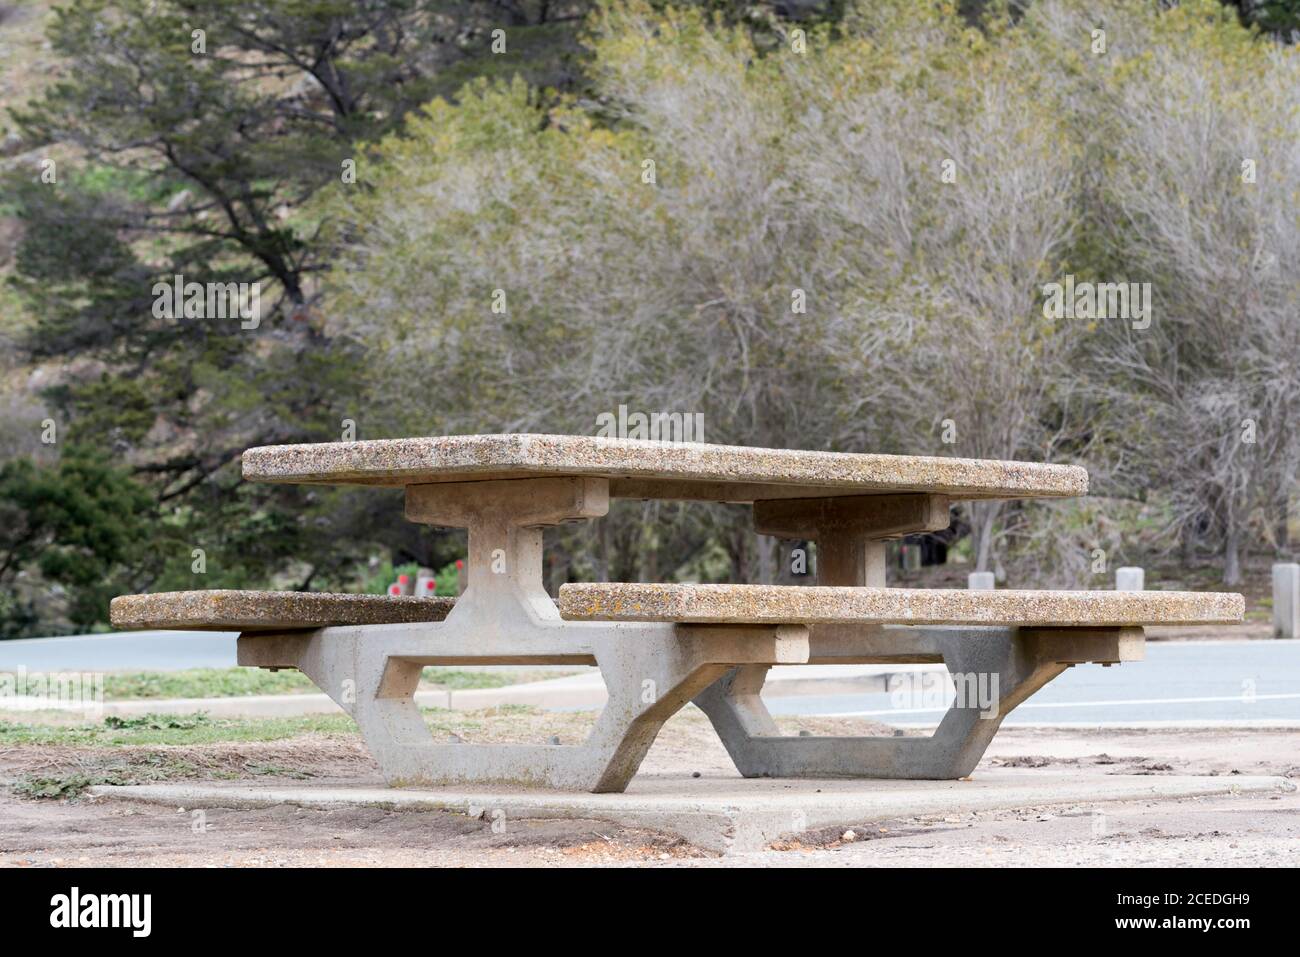 A post war modern or modernist design public picnic table and chair set near Lake George, New South Wales, Australia Stock Photo